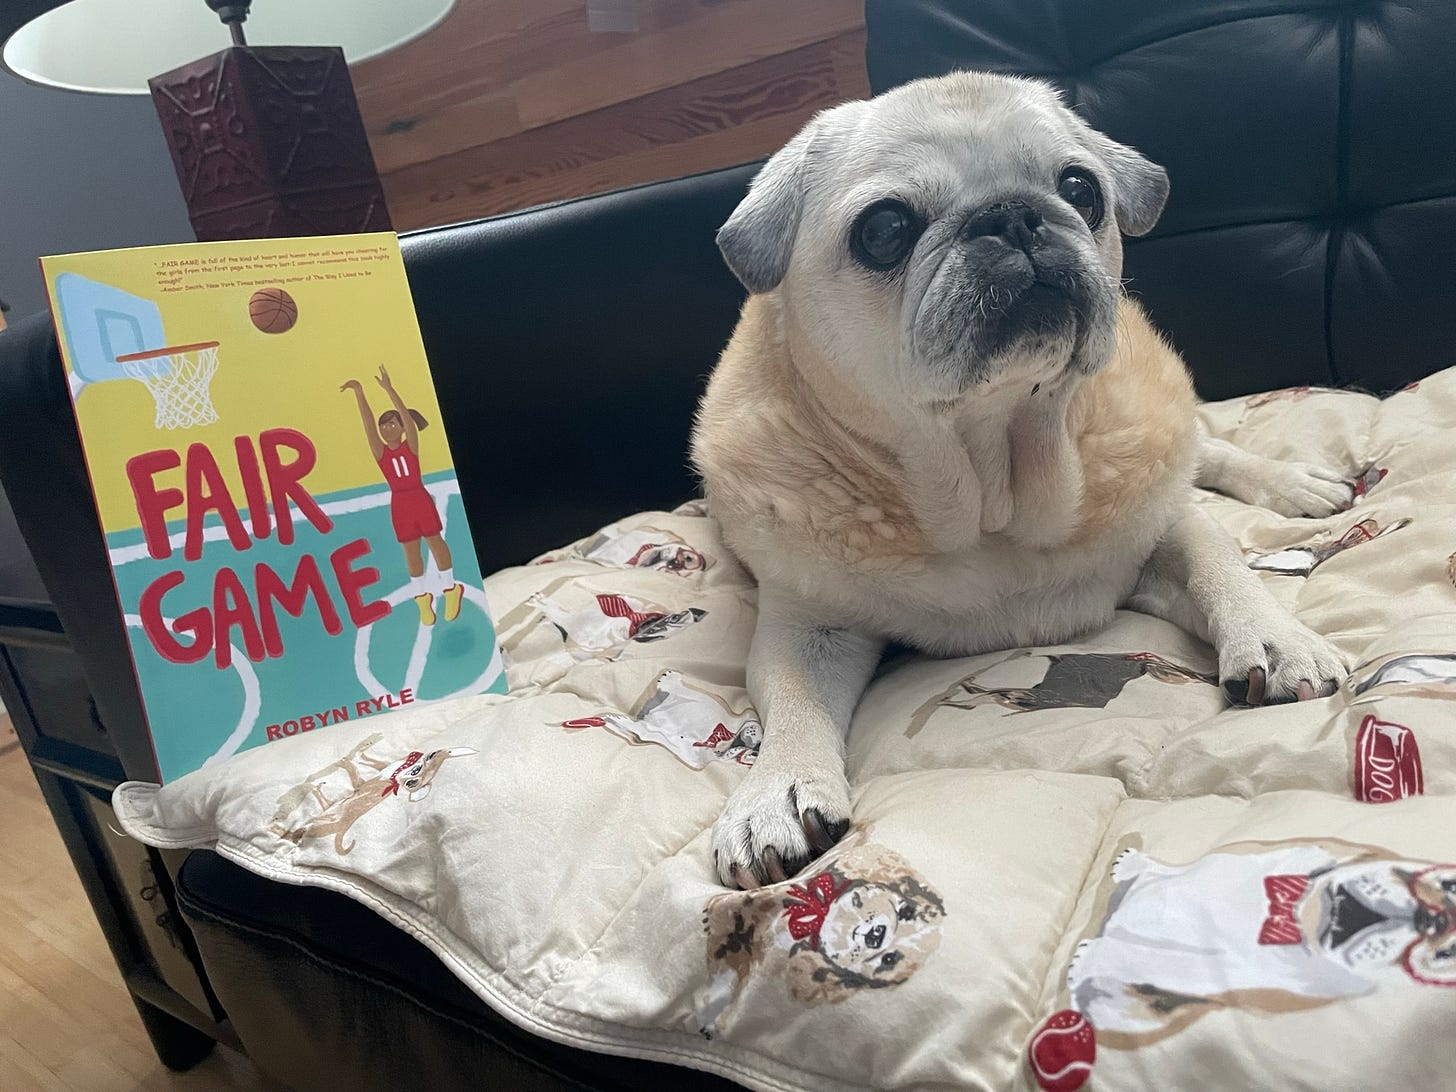 Pug on a blanket next to a copy of FAIR GAME